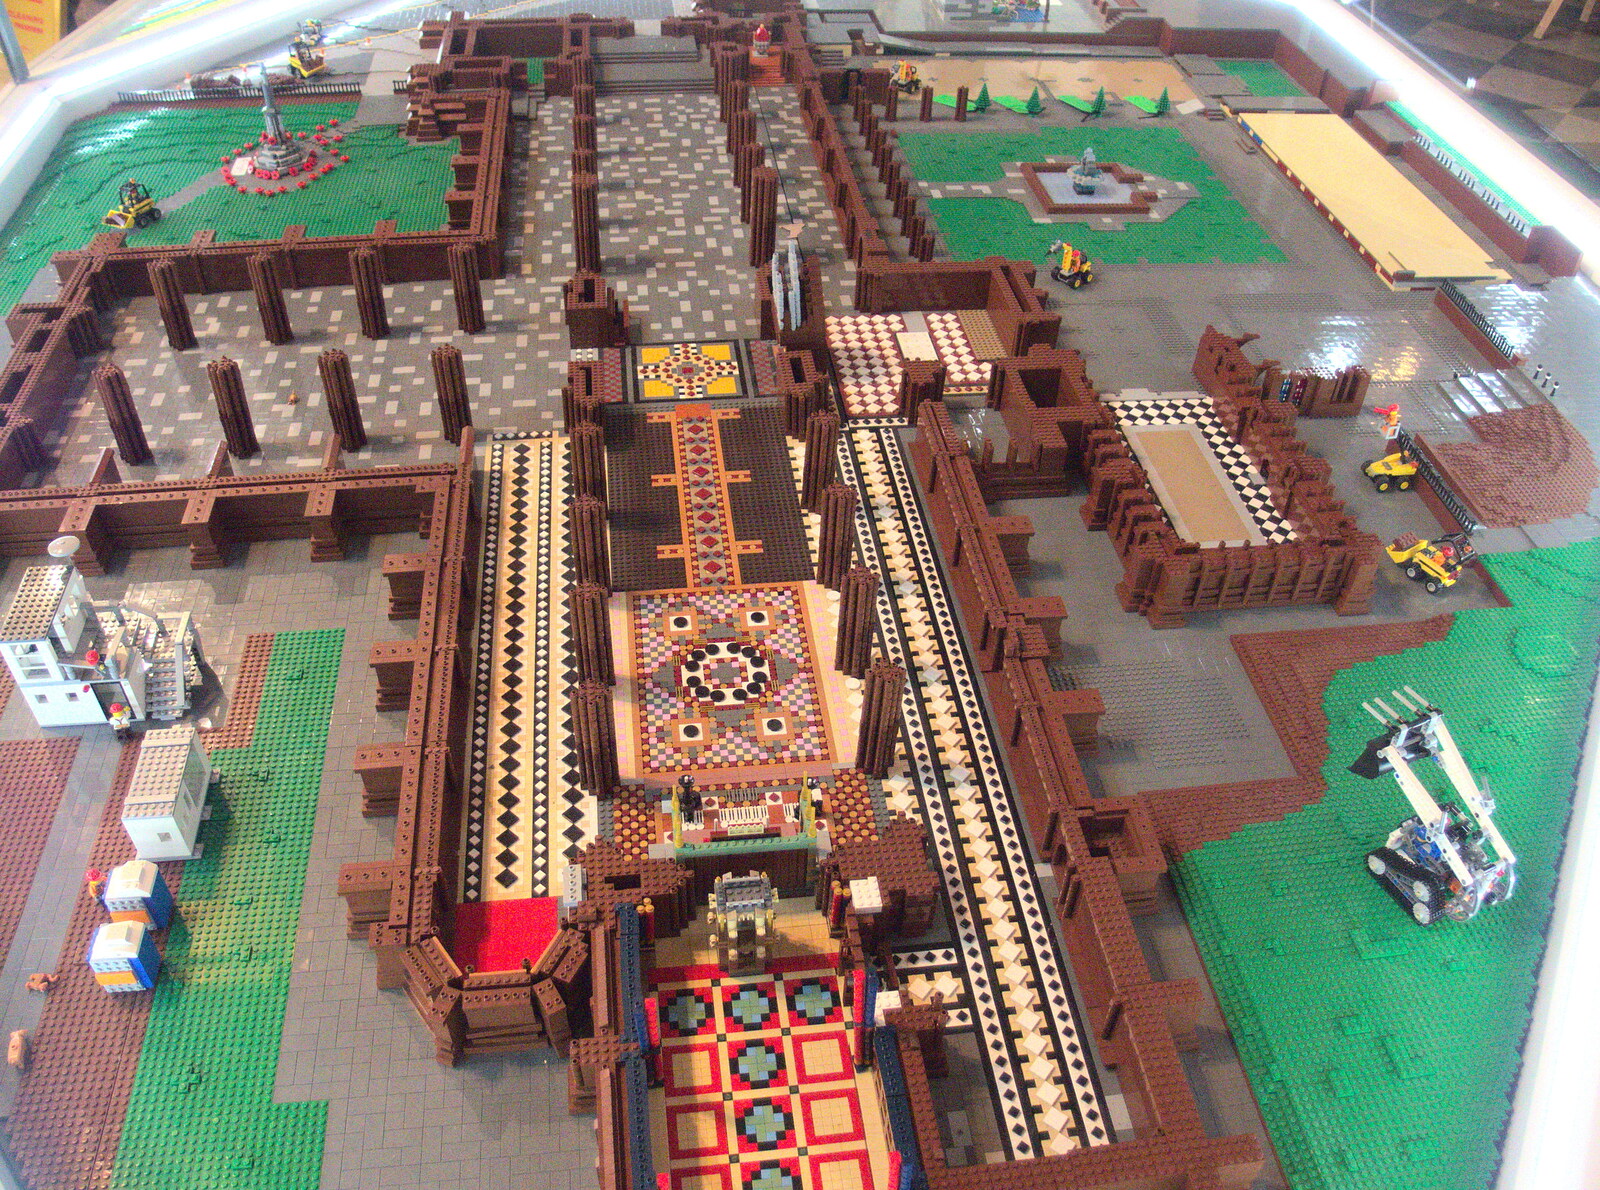 Chester Cathedral's Lego version of itself from A Party and a Road Trip to Chester, Suffolk and Cheshire - 20th December 2015